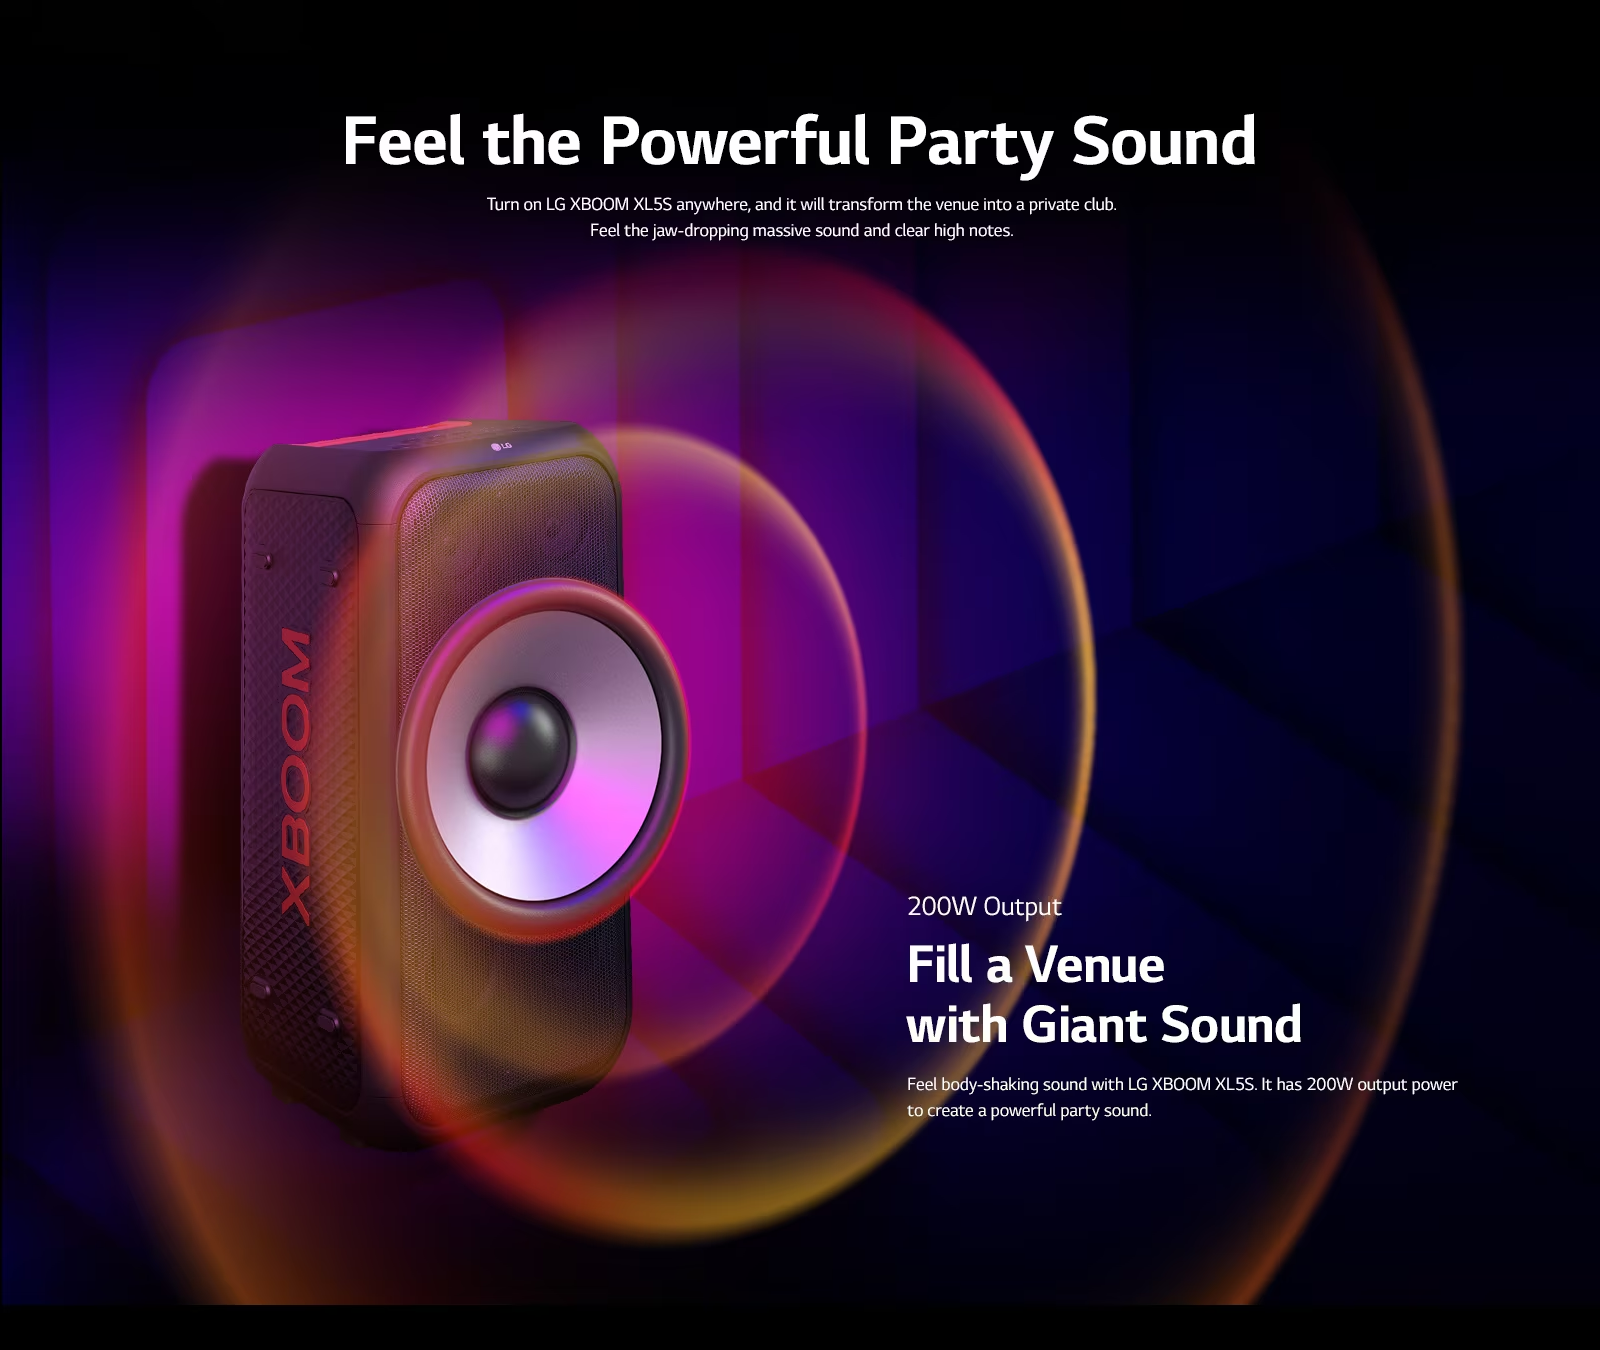 LG XBOOM XL5S is placed on the infinite space. On the wall, square sound graphics are illustrated. In the middel of the speaker an 6.5-inch giant woofer is enlarged in order to emphazie its 200W sound. Sound waves comes out from the woofer. 